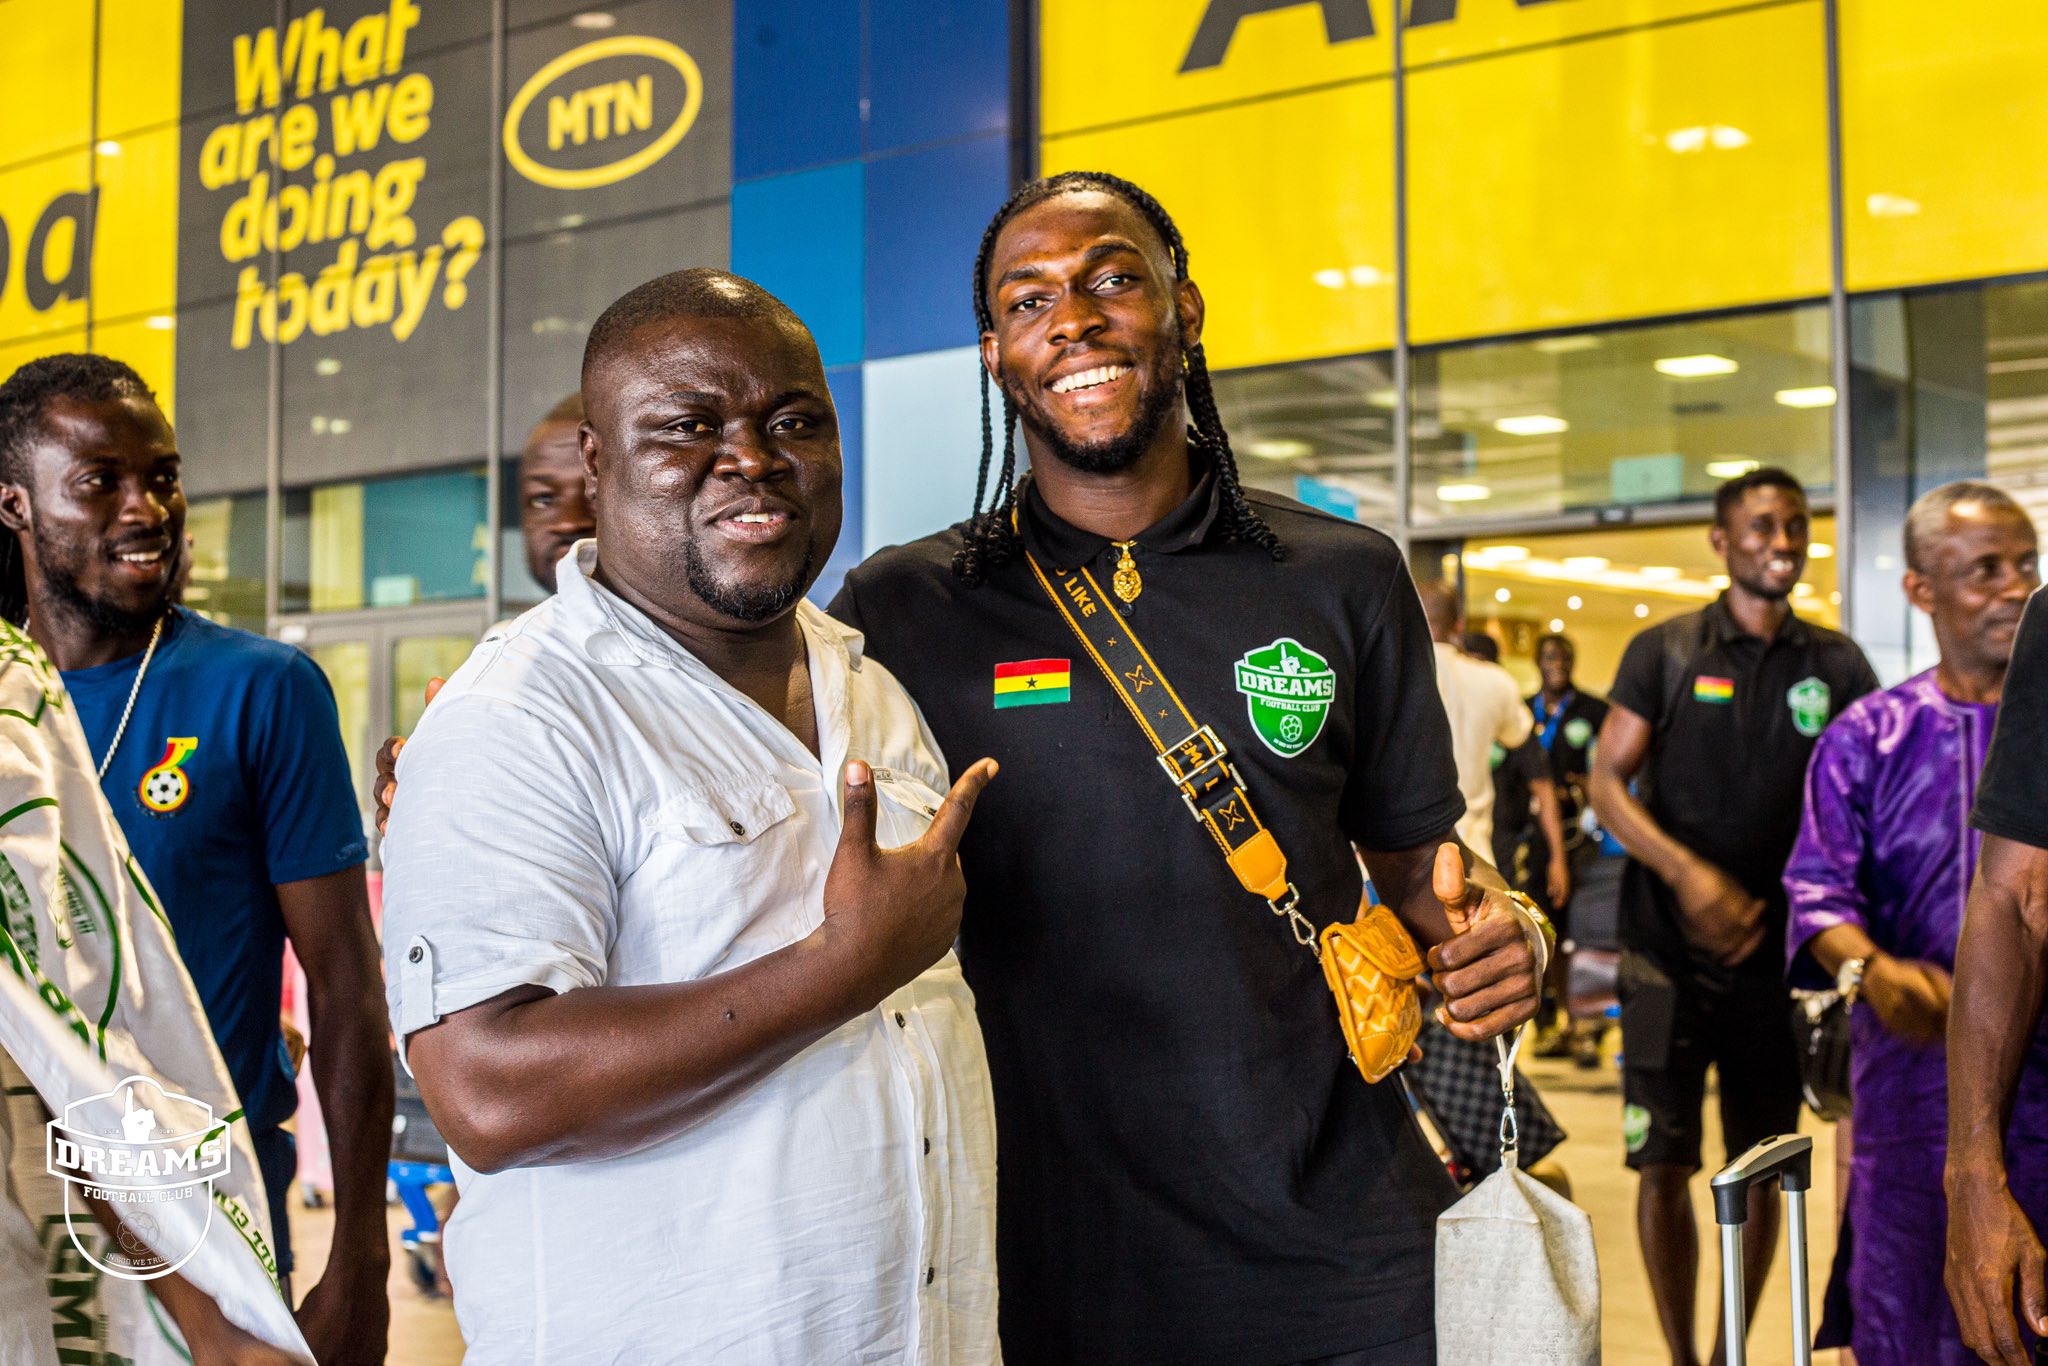 Dreams FC touch down in Ghana after big draw against Zamalek in Egypt [PHOTOS]